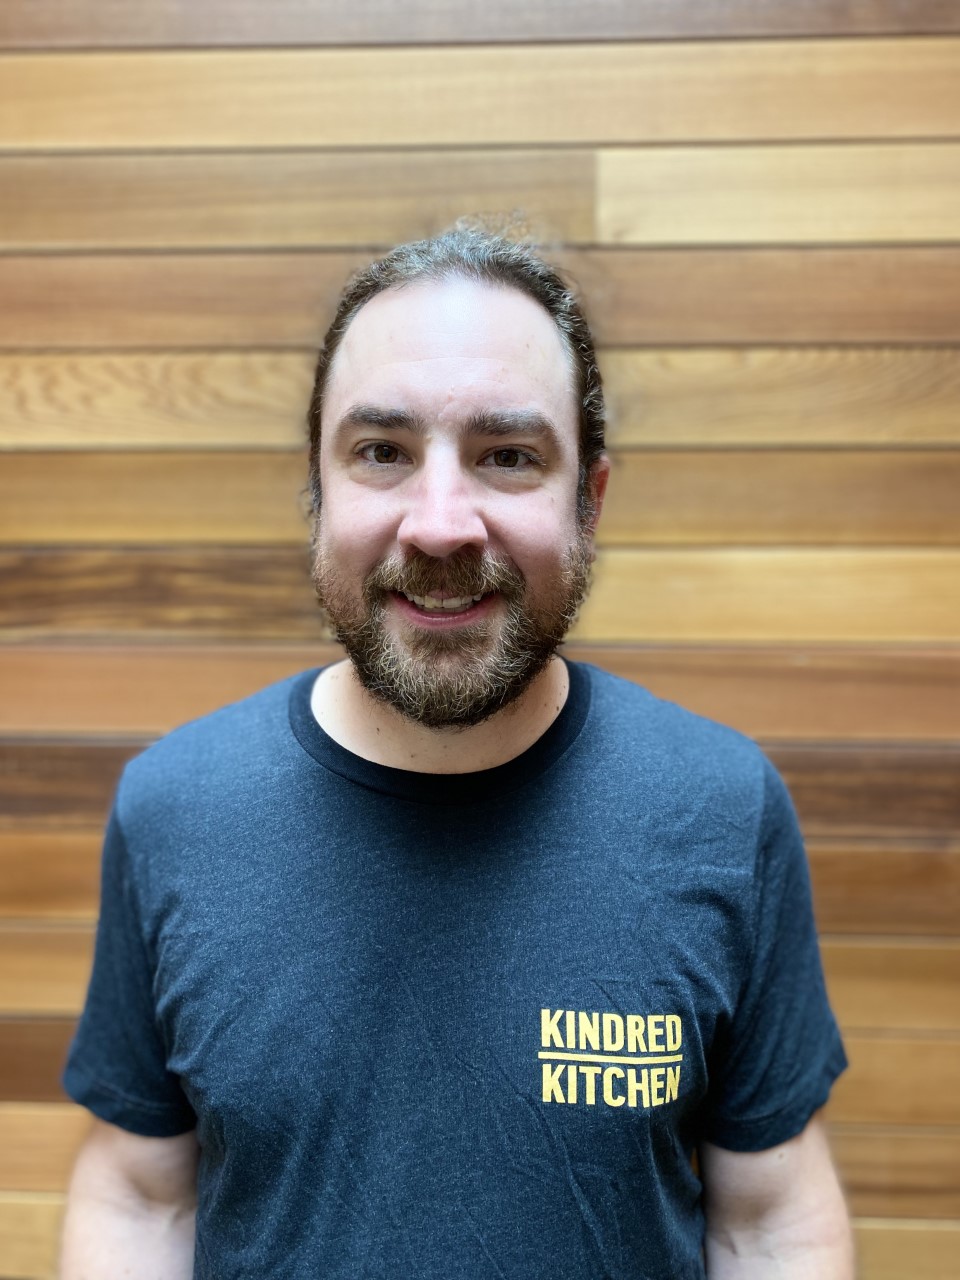 Photo of a man in a Kindred Kitchen t-shirt, smiling at the camera.